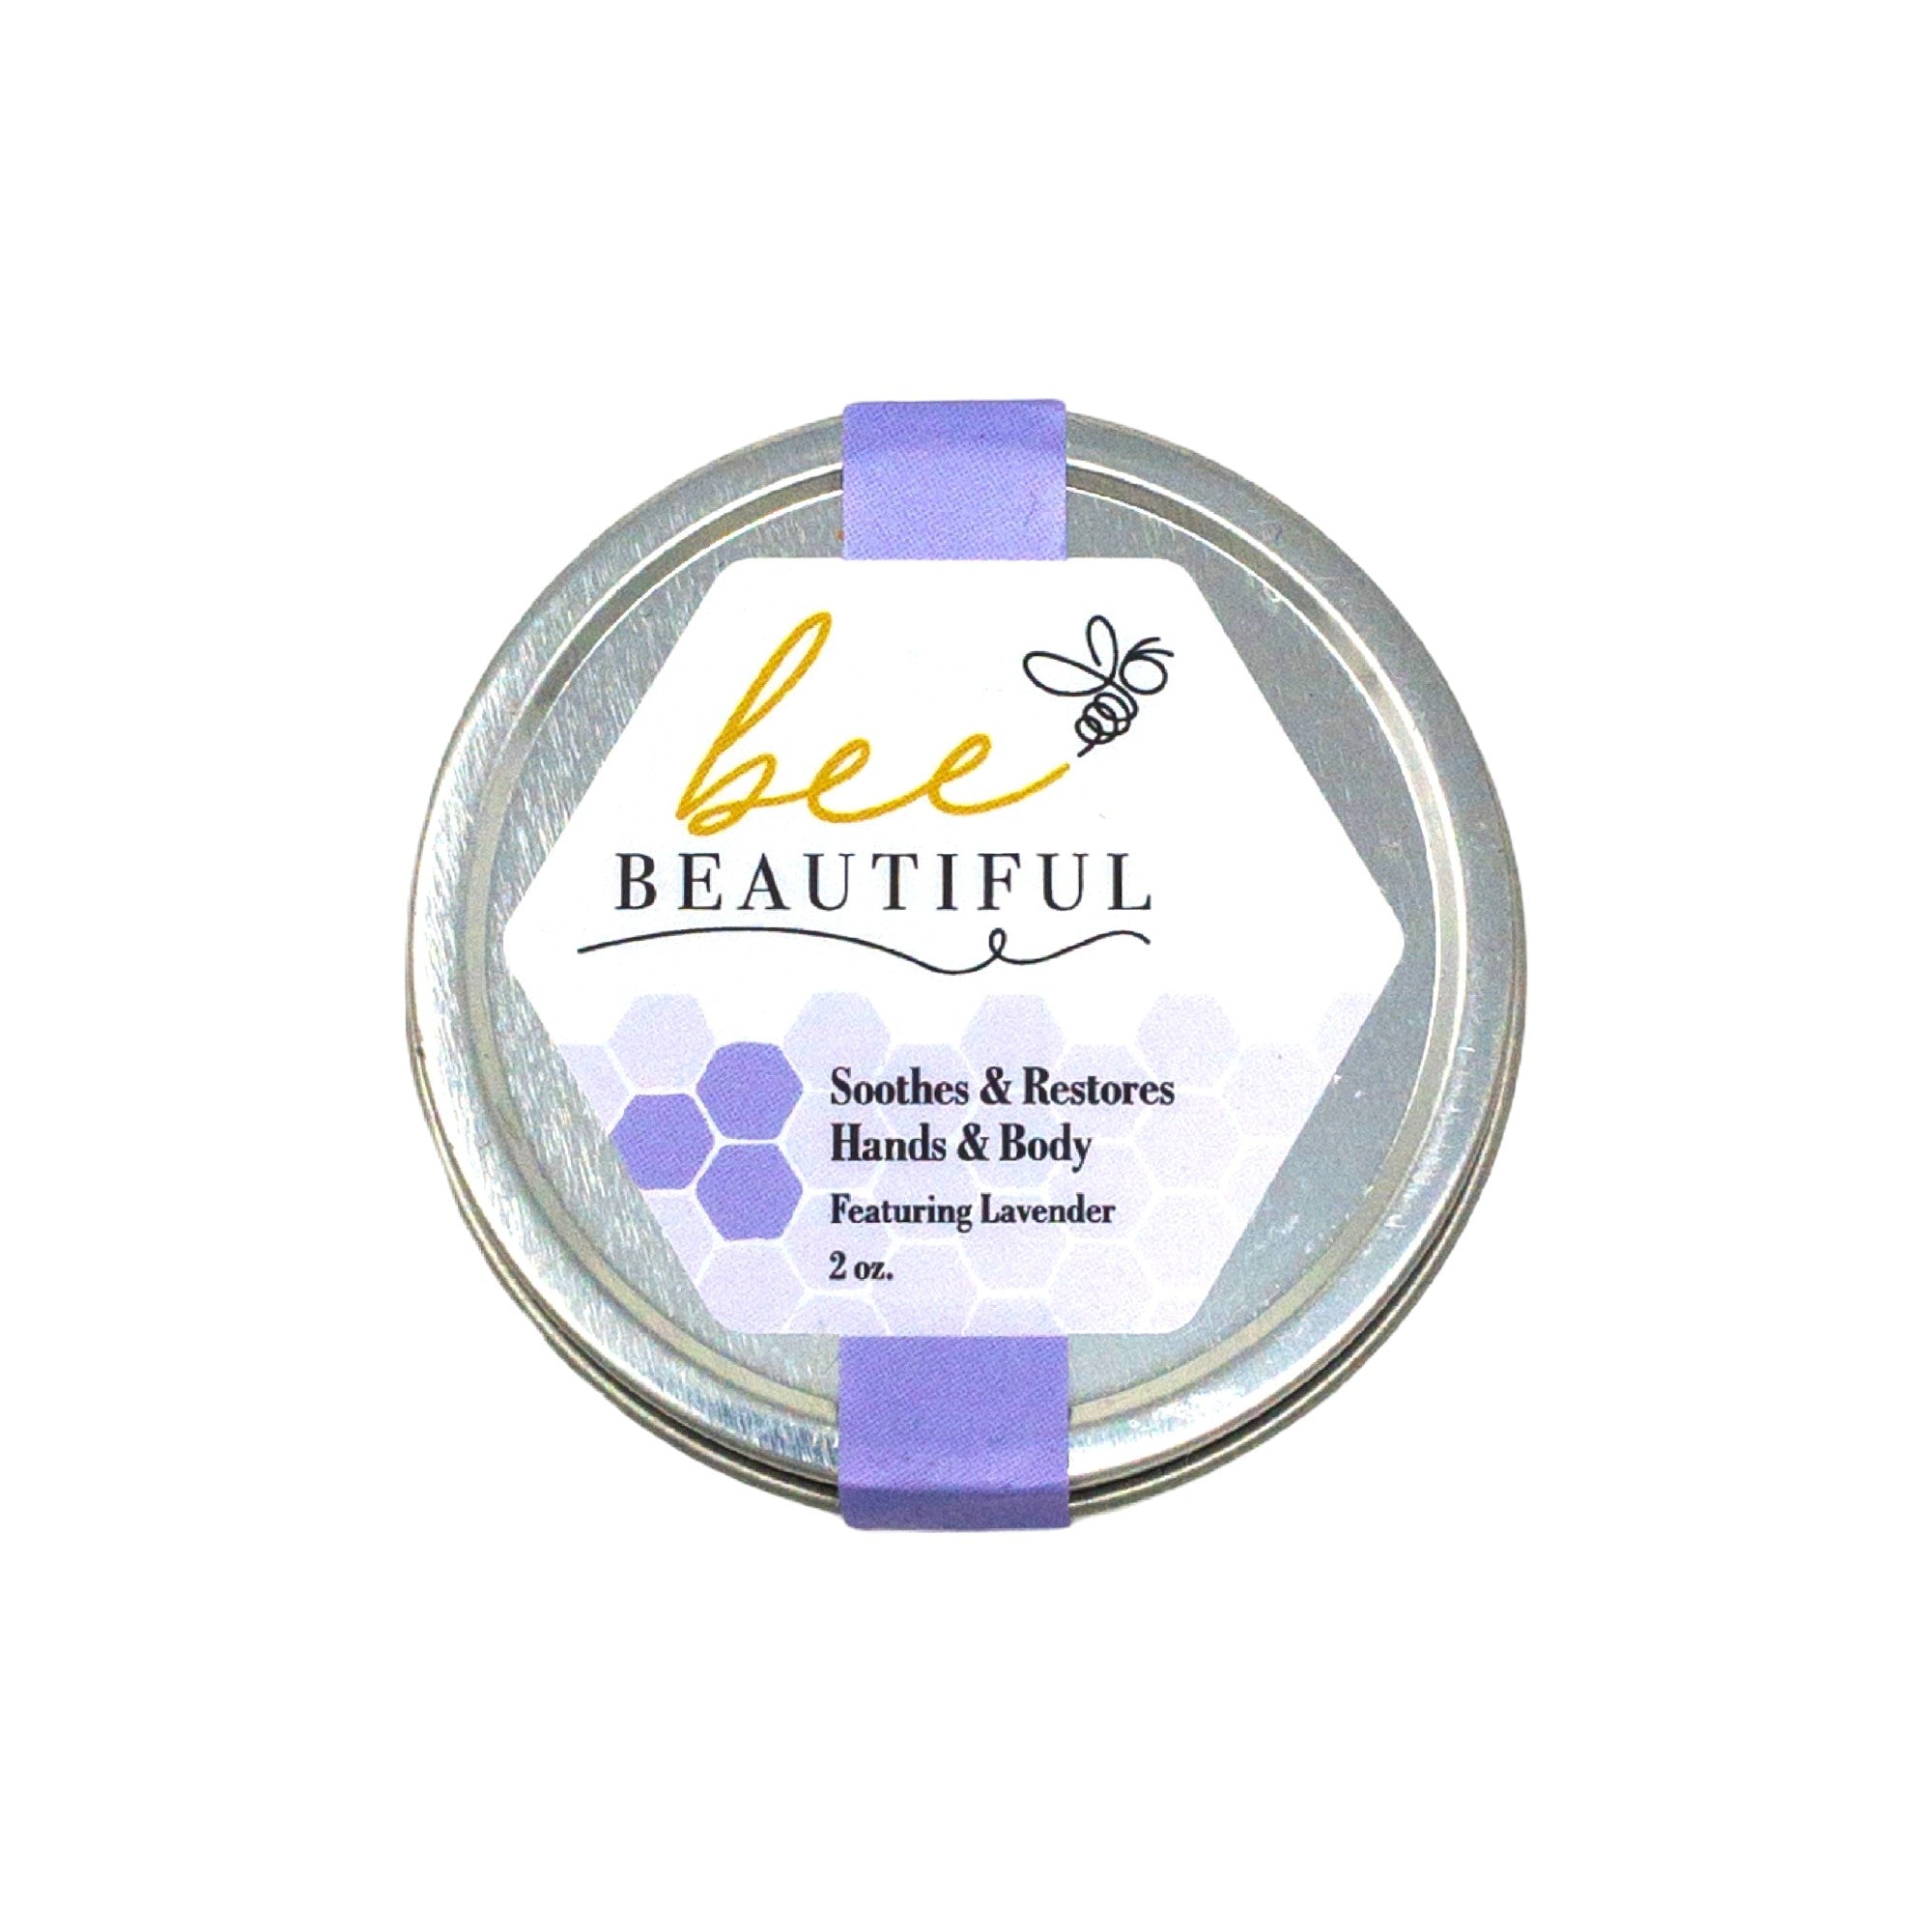 Bee Beautiful - Soothes & Restores Hands & Body - The Roadside